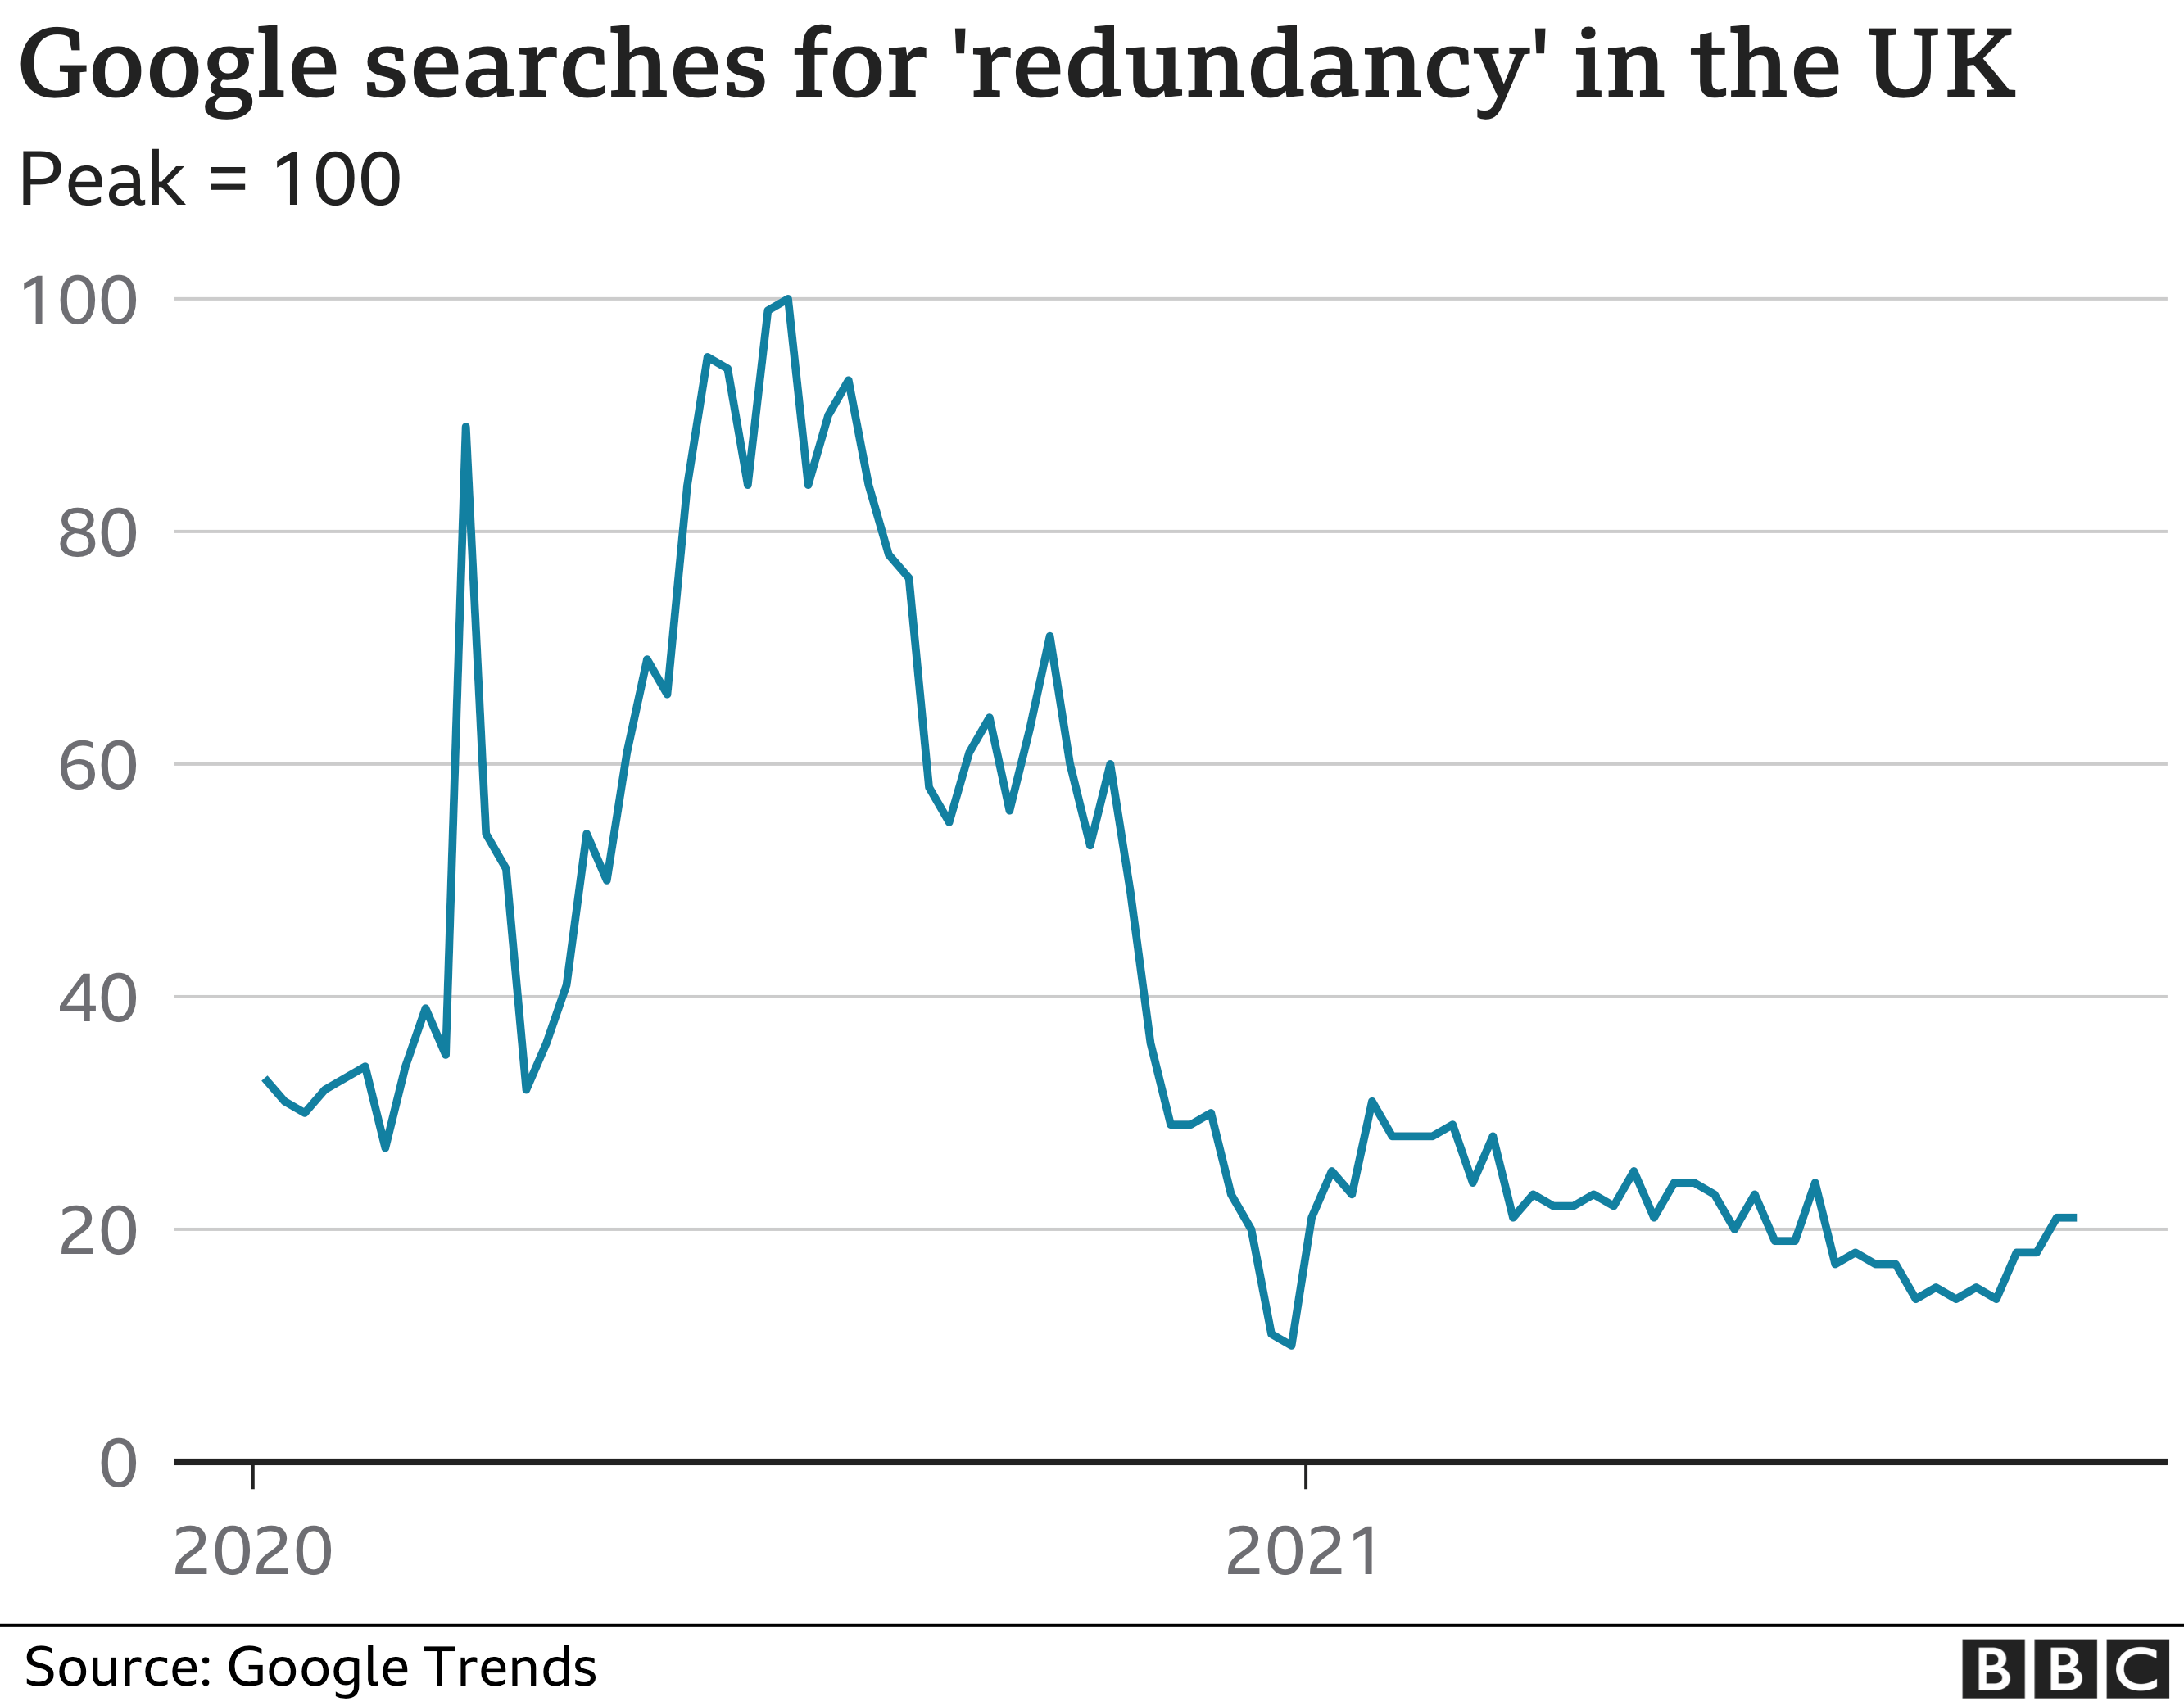 Graph of Google searches for the word 'redundancy' over time